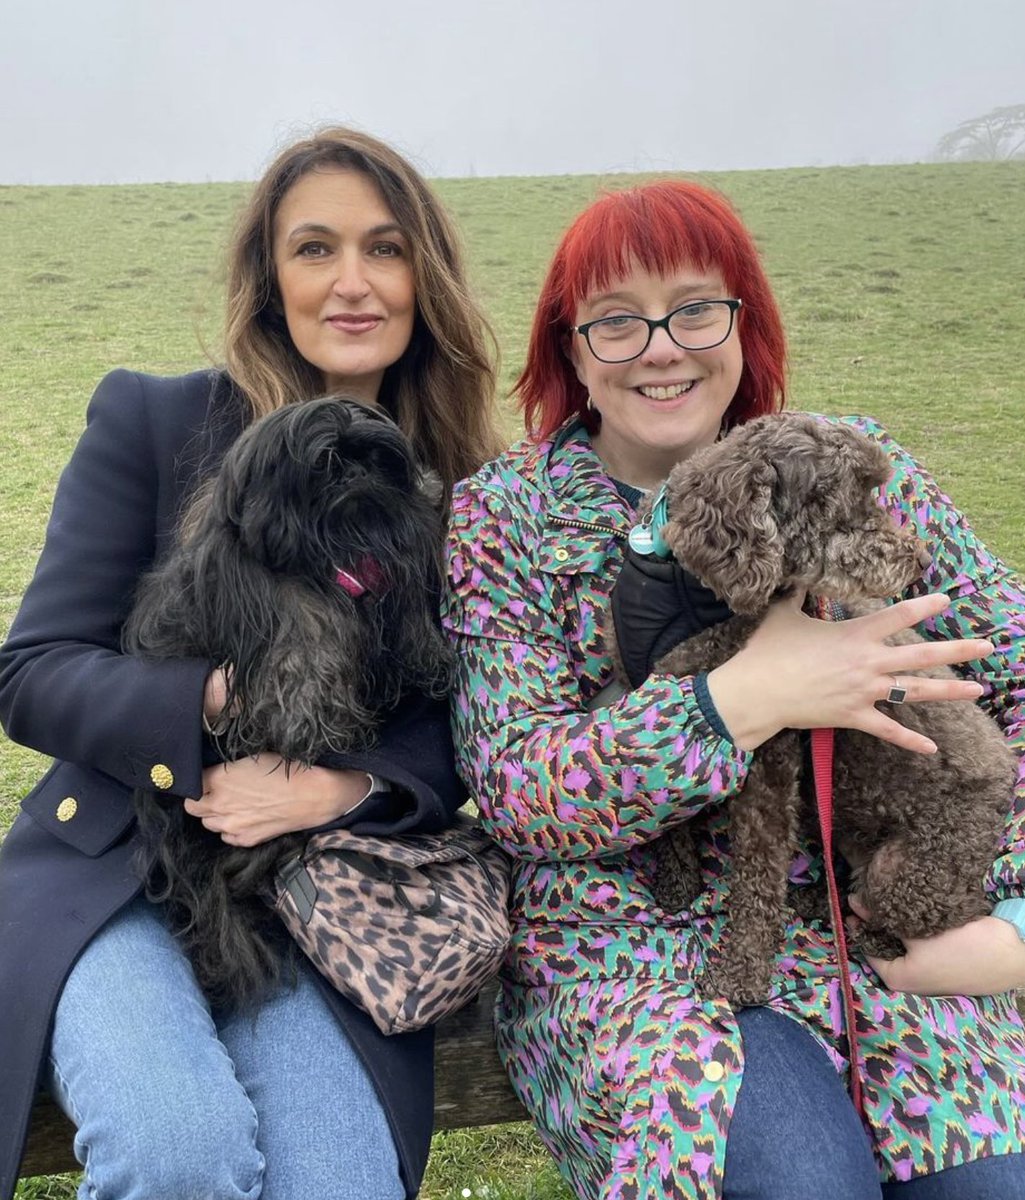 🐕 @AngelaBarnes and her dog Tina are this week's guests on Walking The Dog! 🐕 Listen to Part 1 now wherever you get your pods. 🎧 Part 2 available tomorrow!